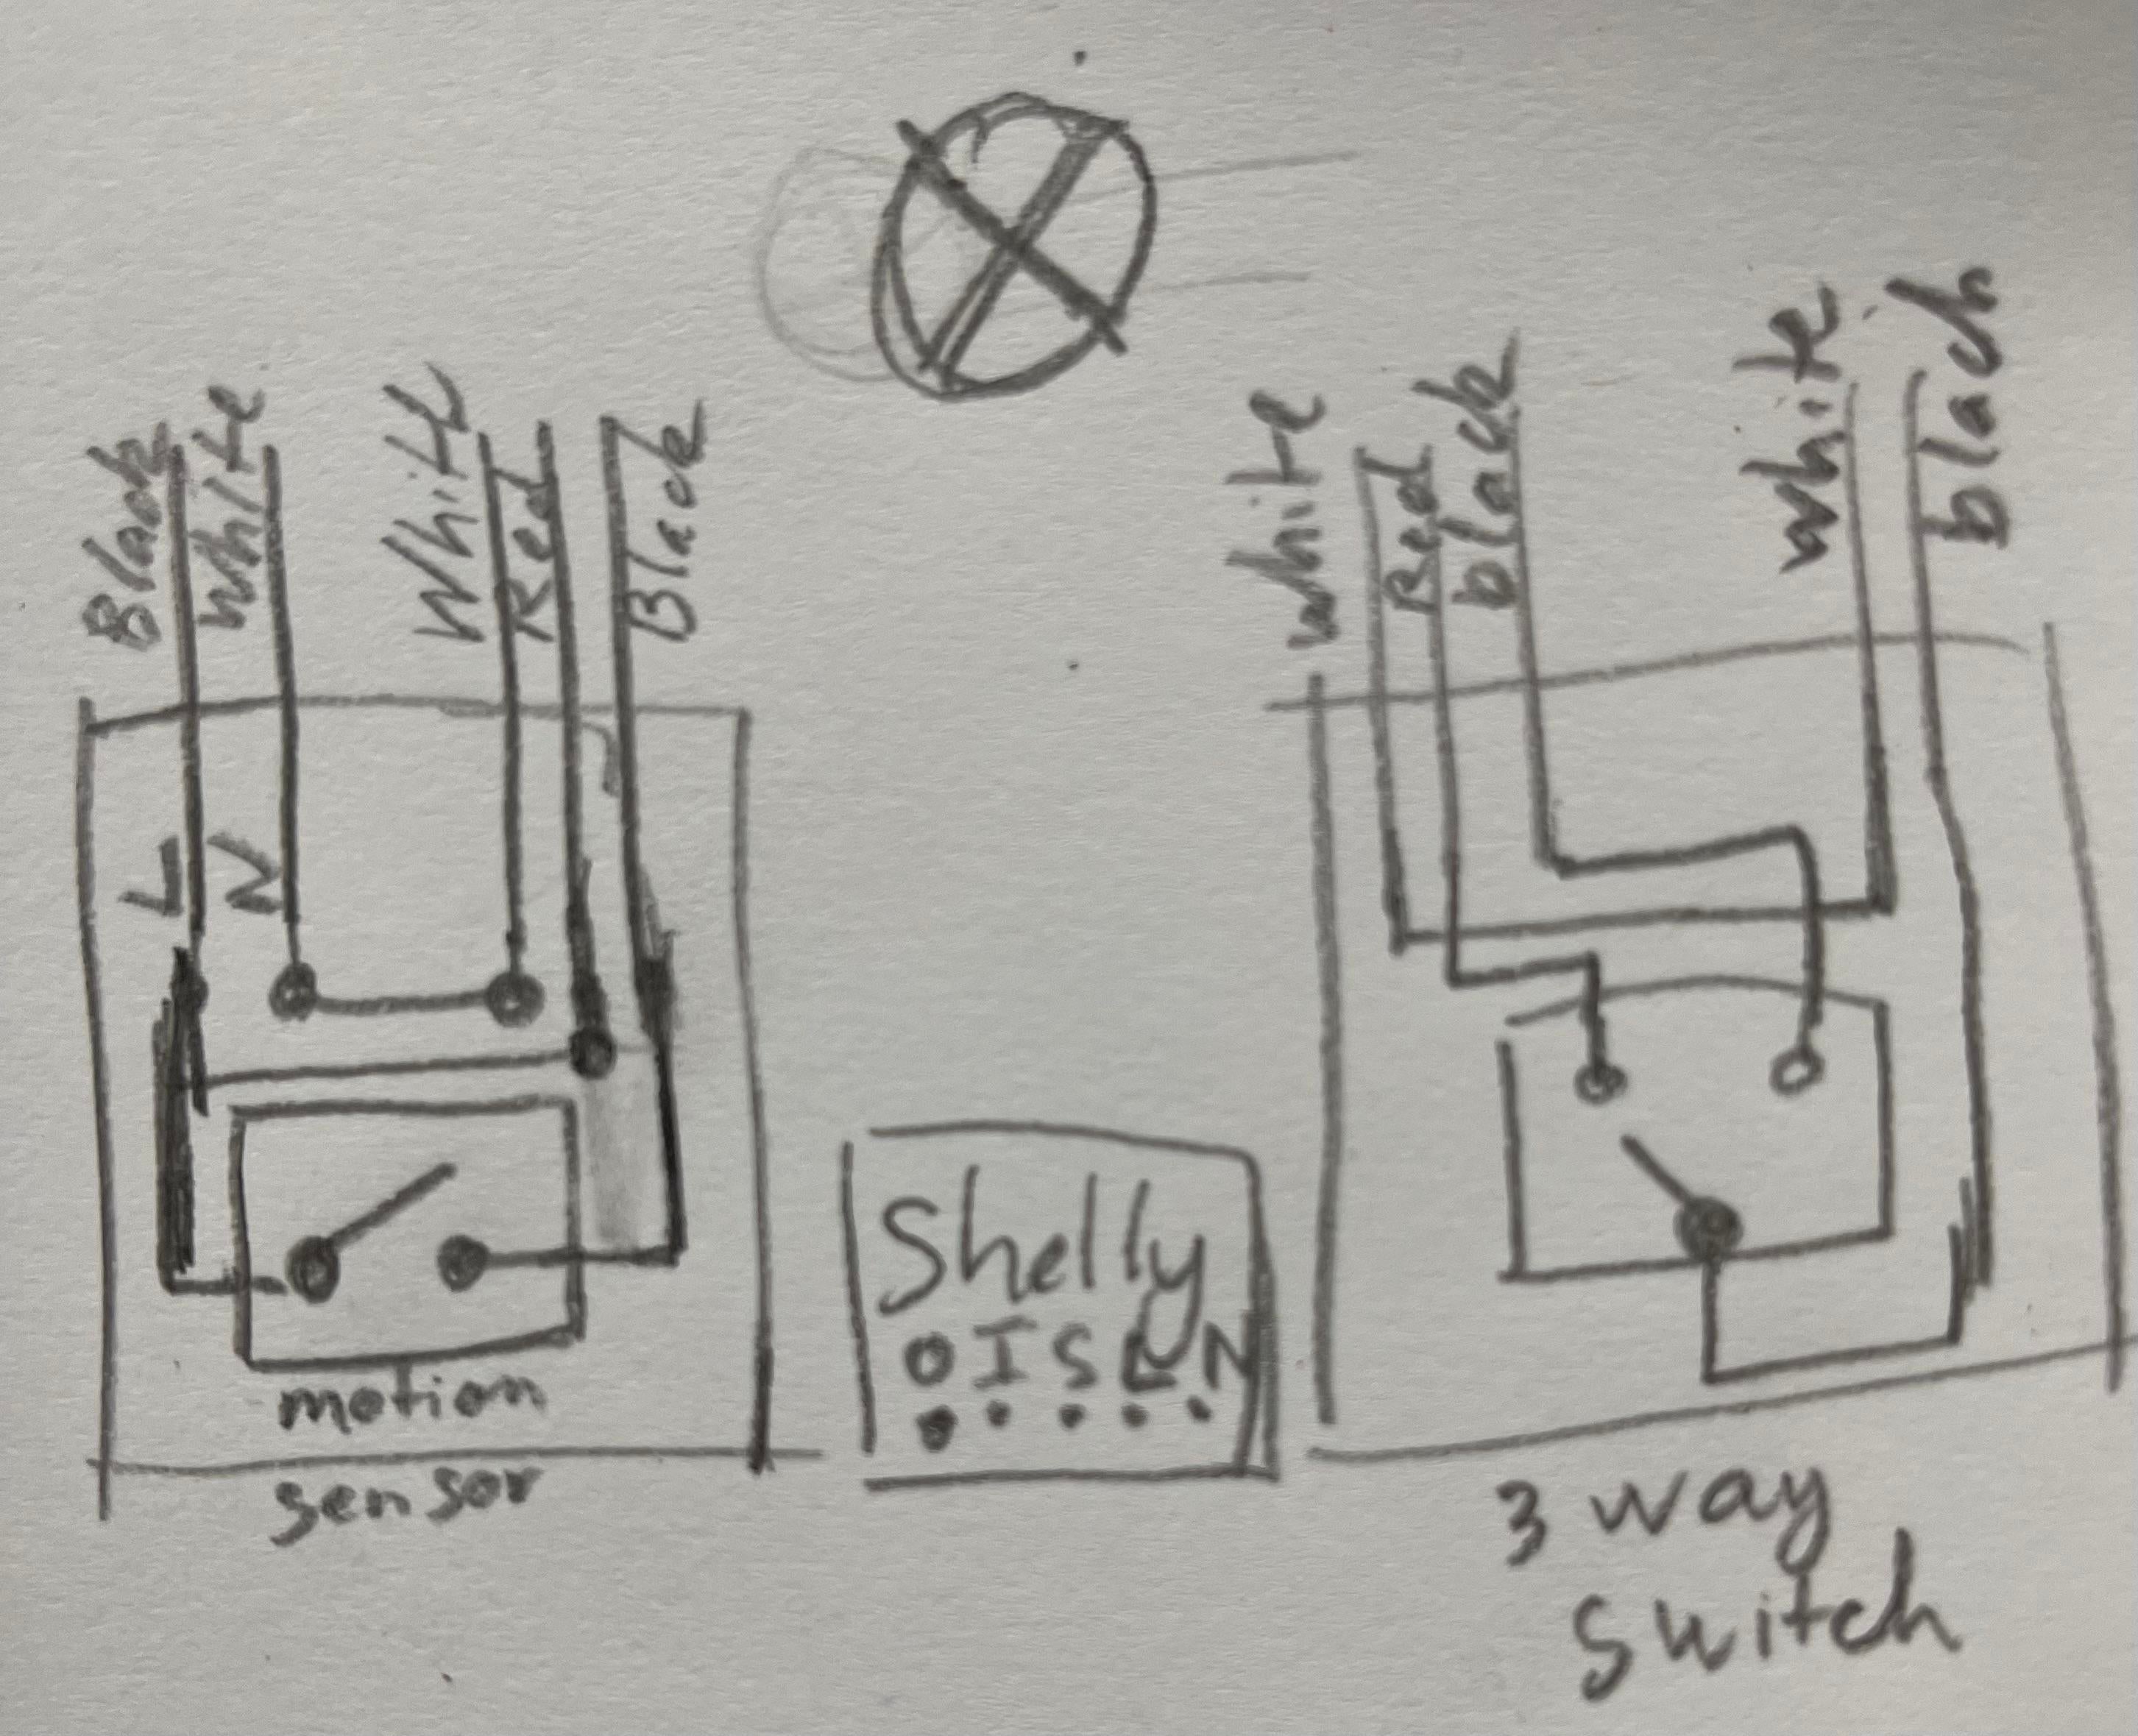 I need help wiring Shelly to the 3 way switch